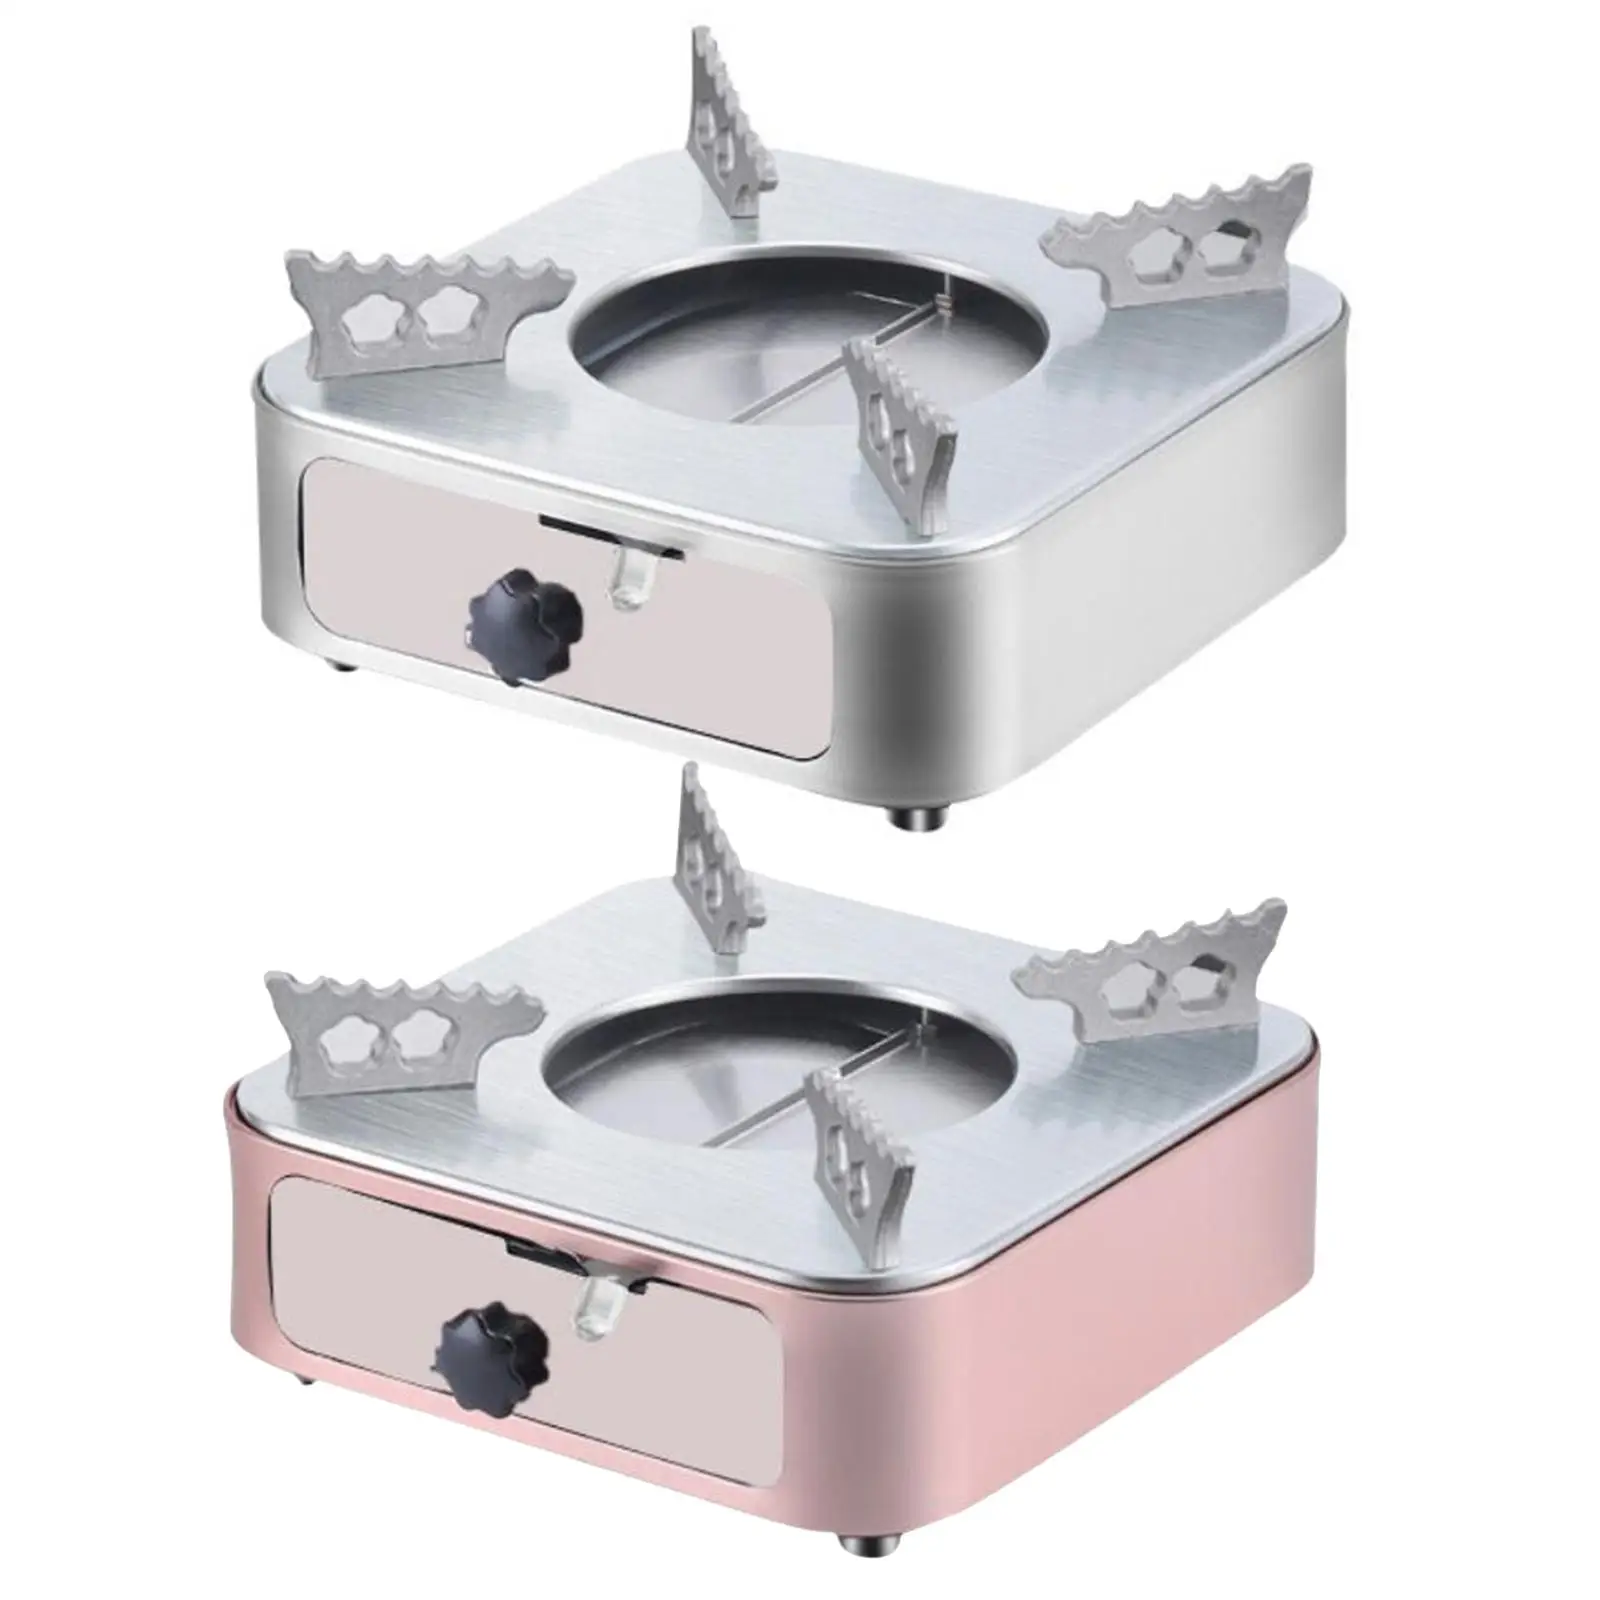 Mini Alcohol Stove Sturdy Kitchen Equipment Lightweight Burner Drawer Type Spirit Burner for Cooking Outdoor Picnic BBQ Camping